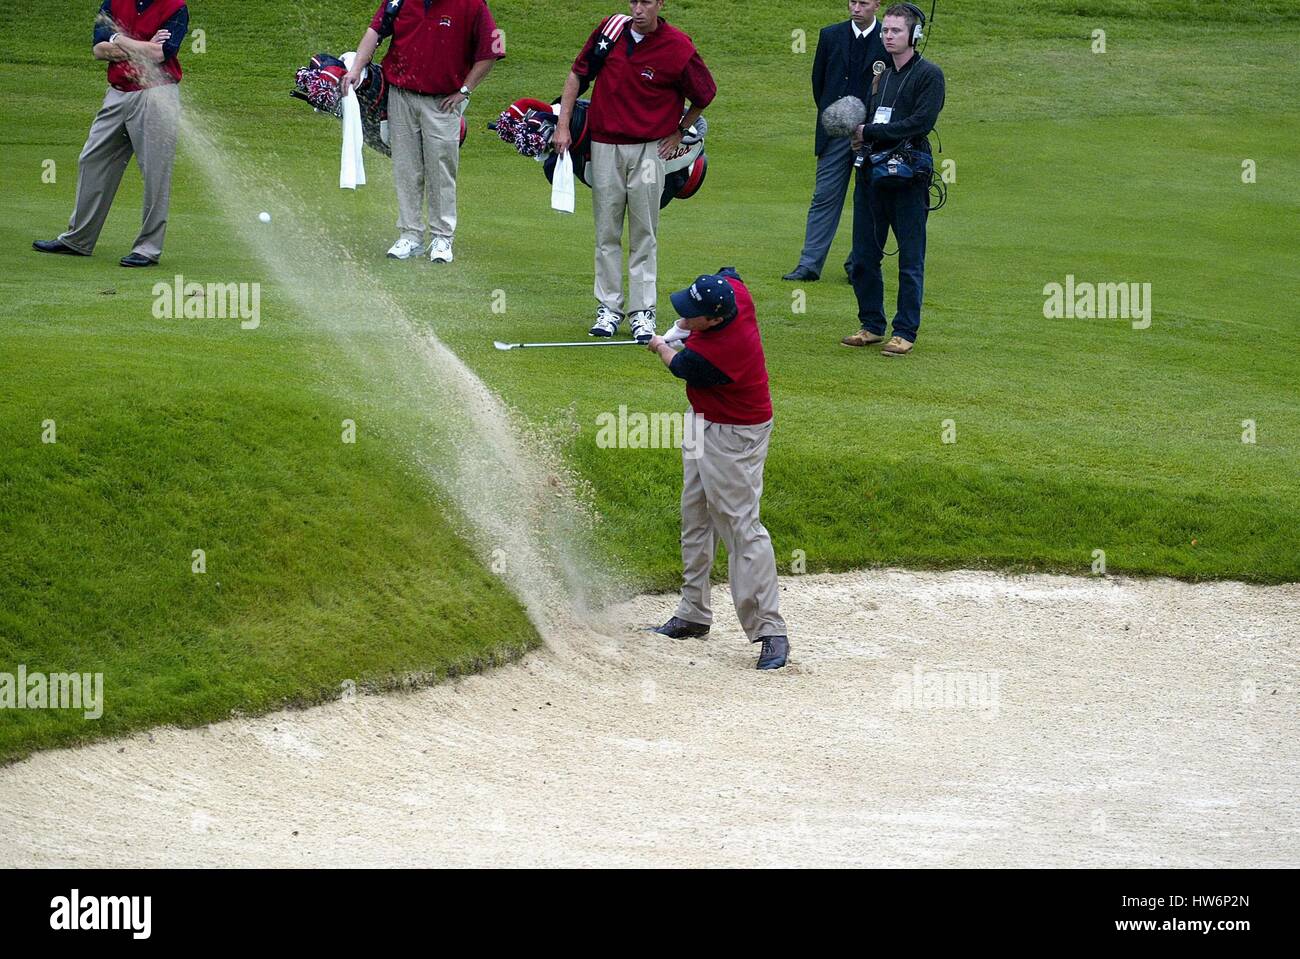 PHIL MICKELSON USA Ryder Cup 0228 Septembre 2002 Banque D'Images